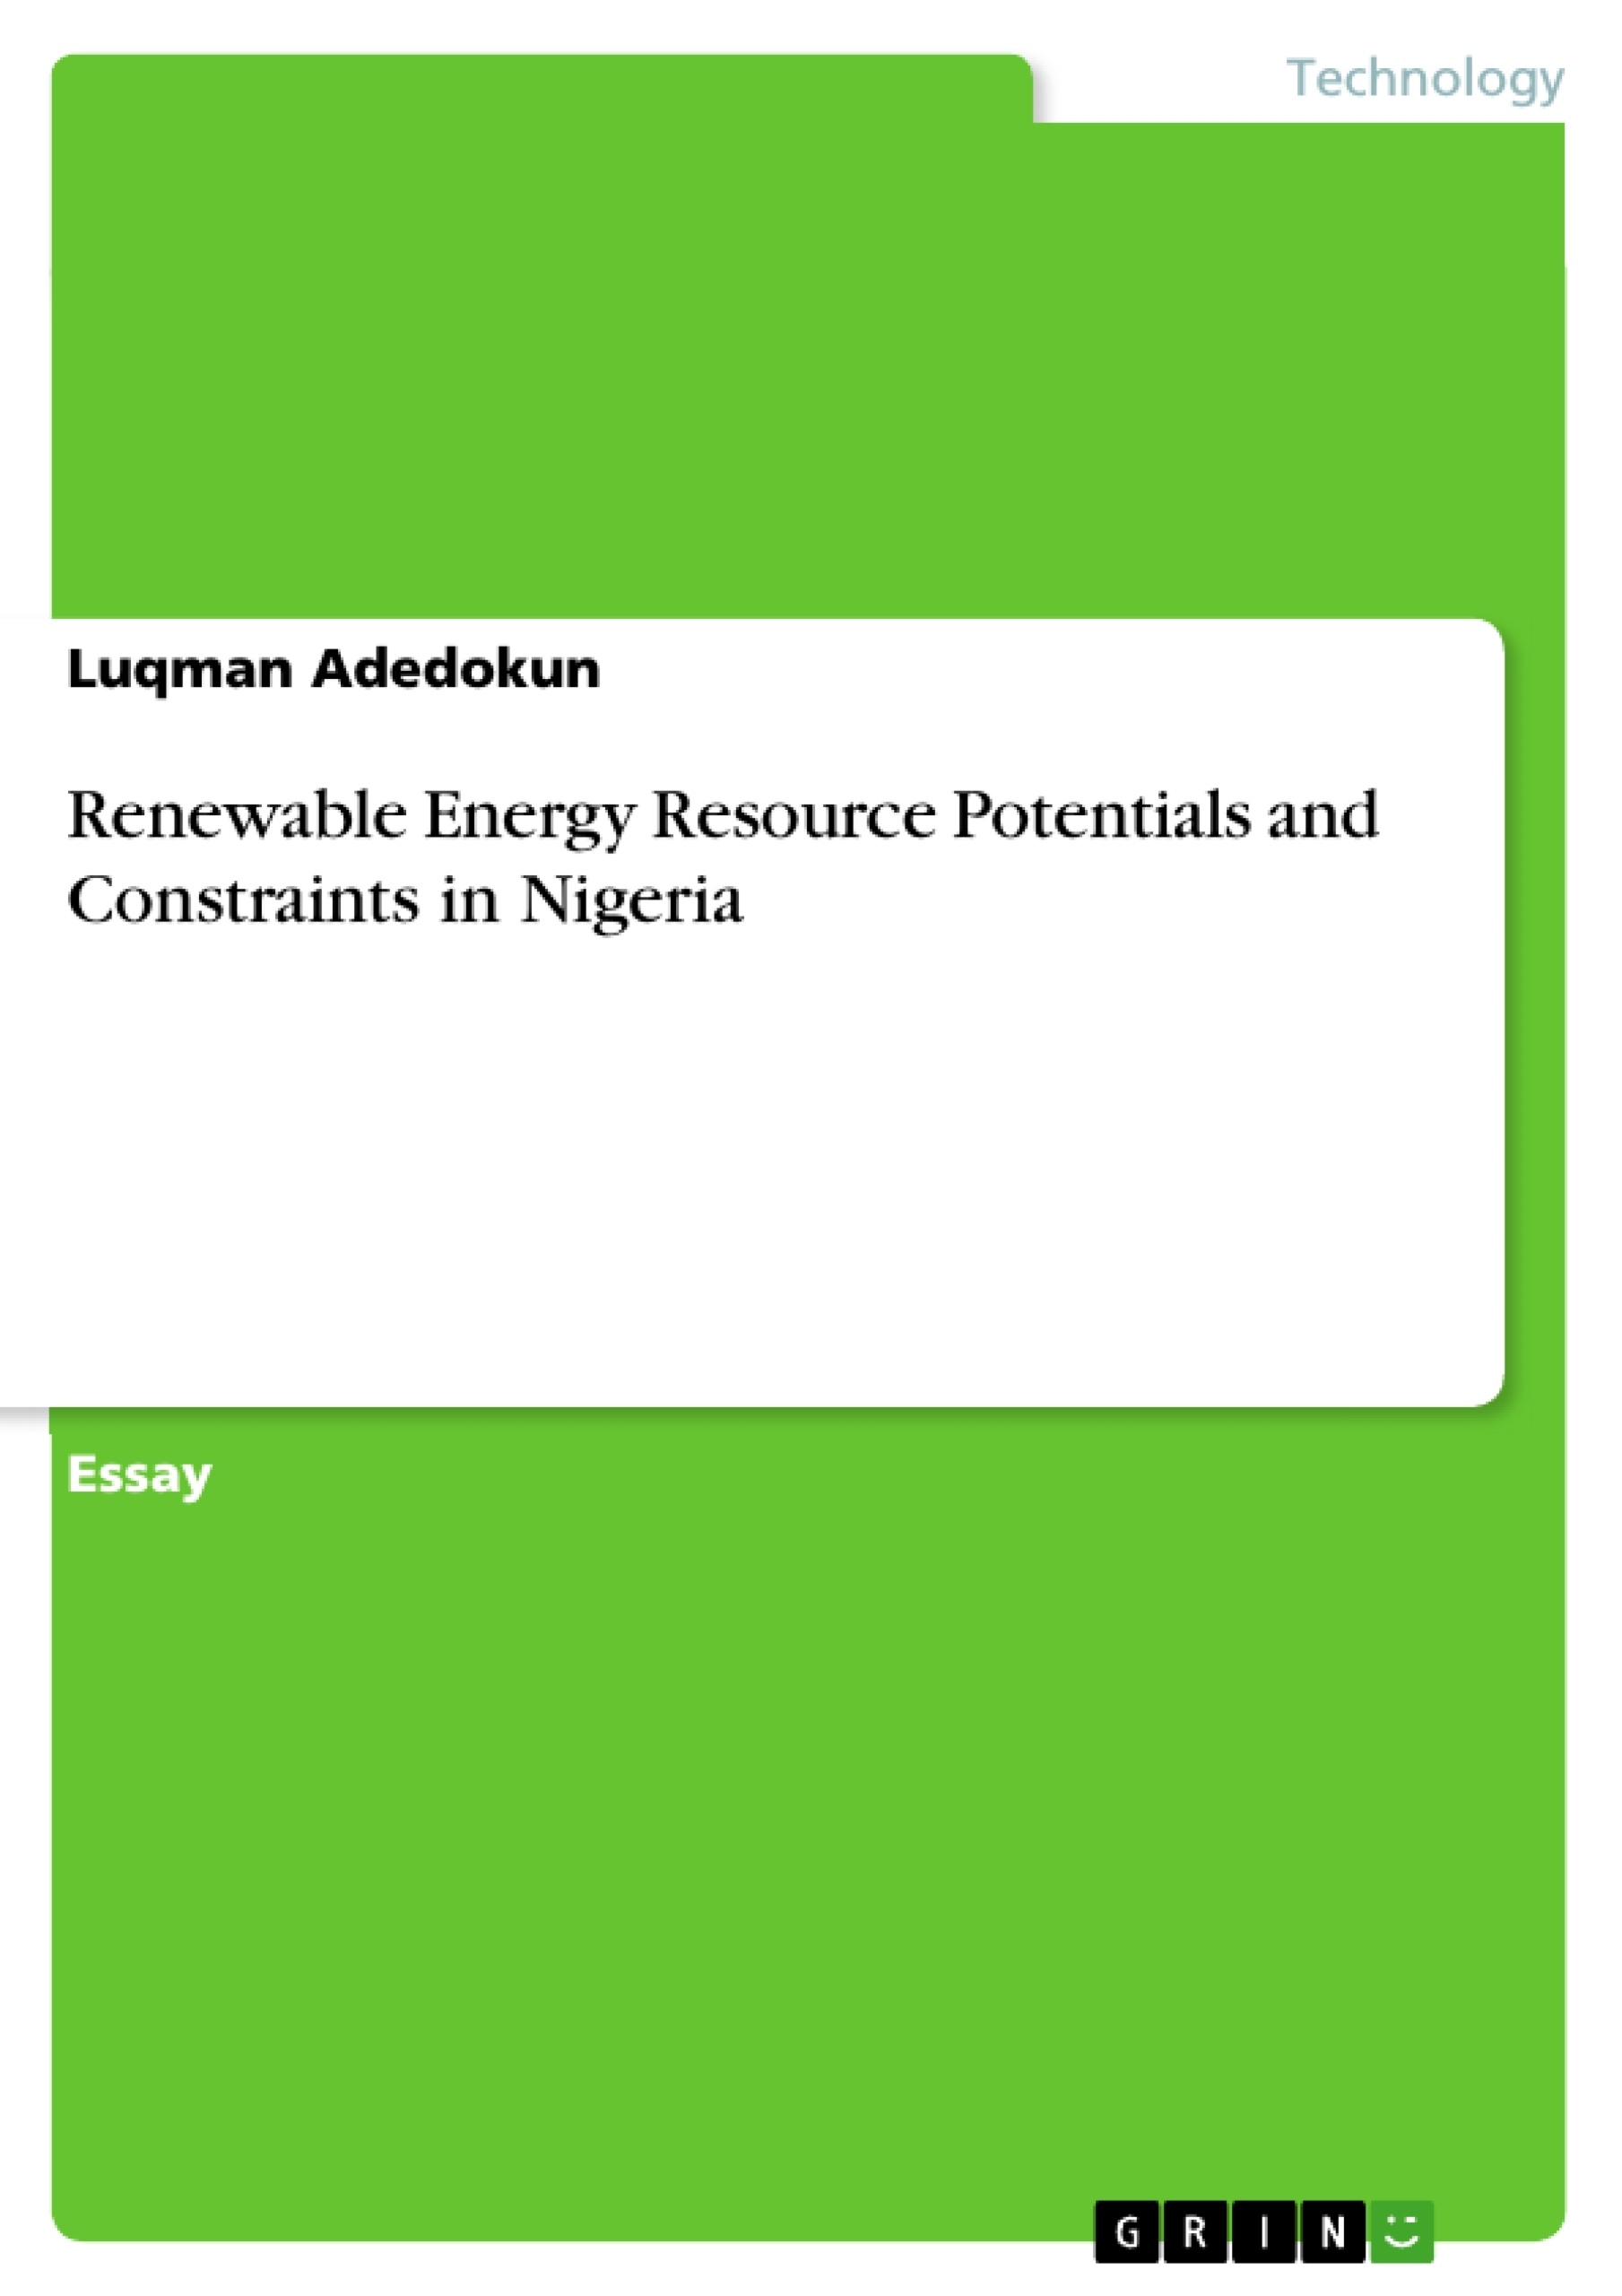 Title: Renewable Energy Resource Potentials and Constraints in Nigeria